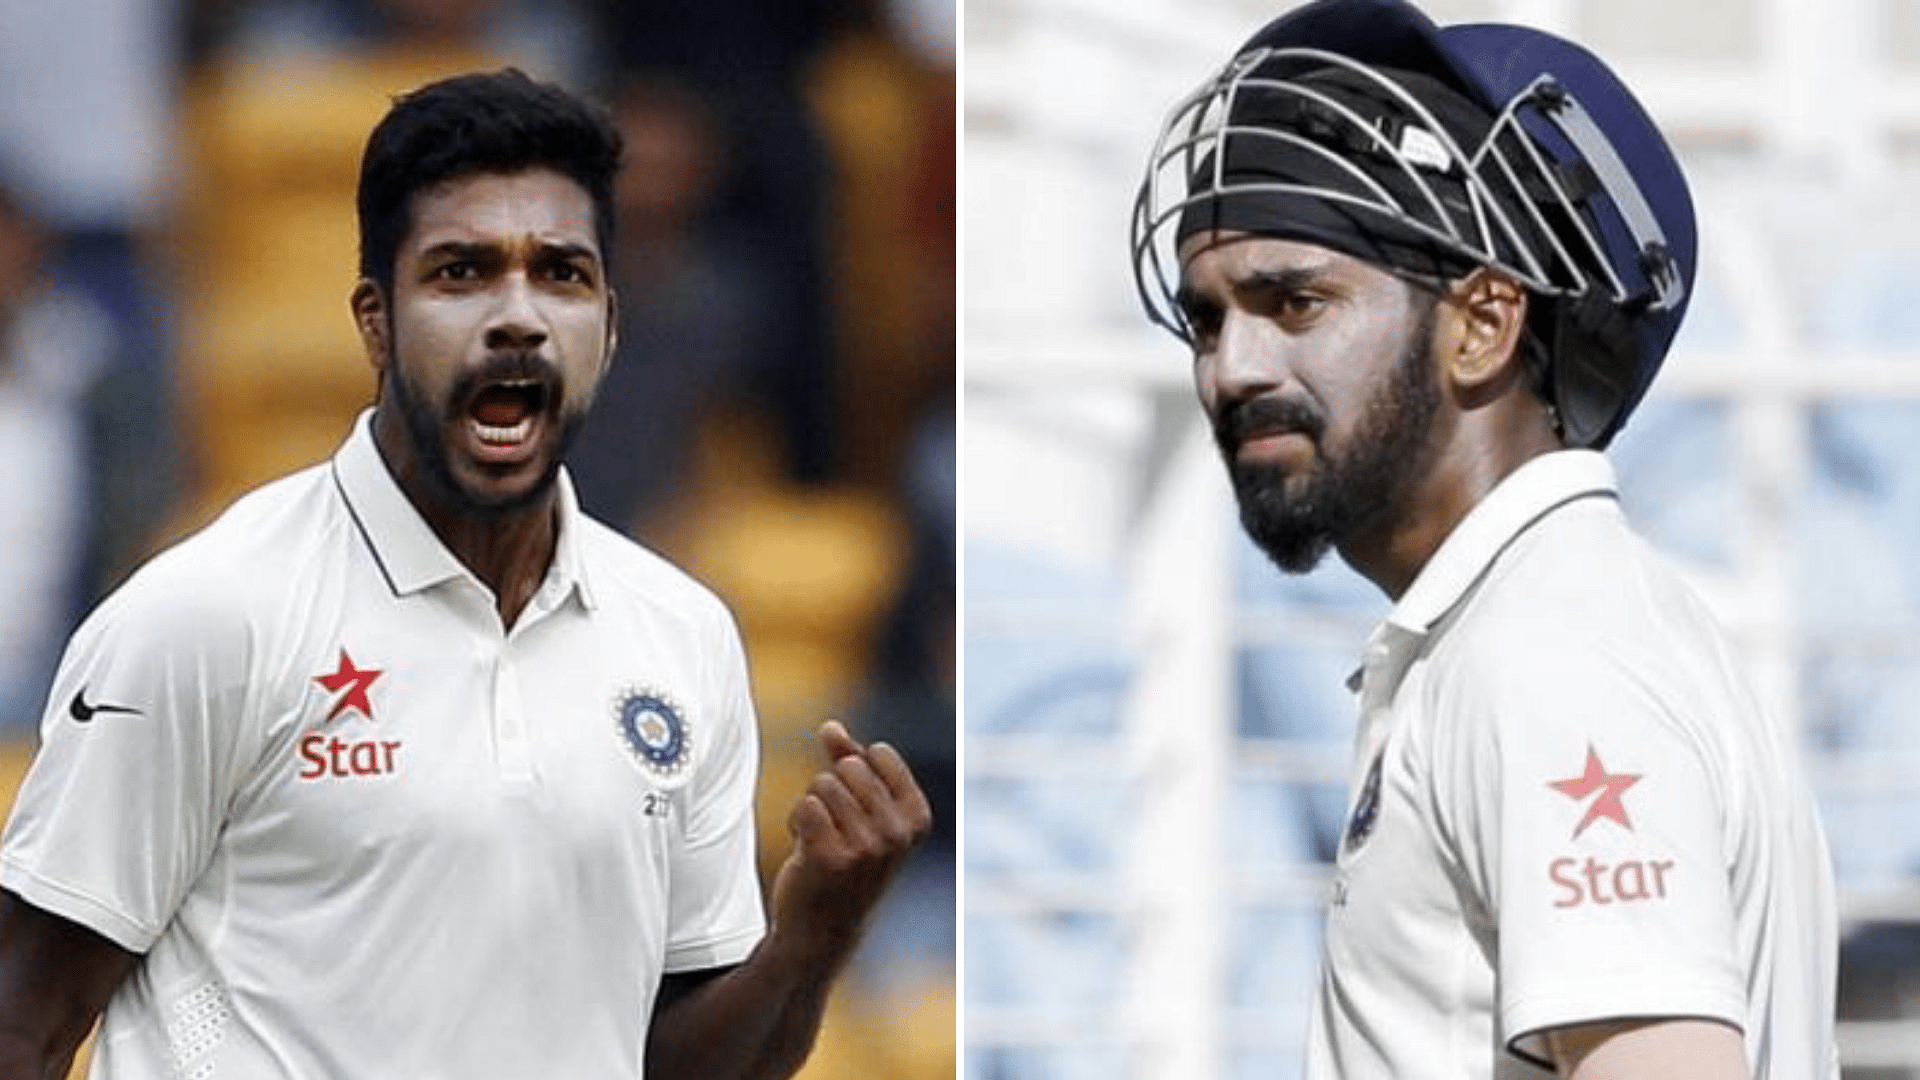 KL Rahul has been named captain, while Varun Aaron is likely to feature in the XI as India A face England Lions in their second ‘Test’ at Mysuru.